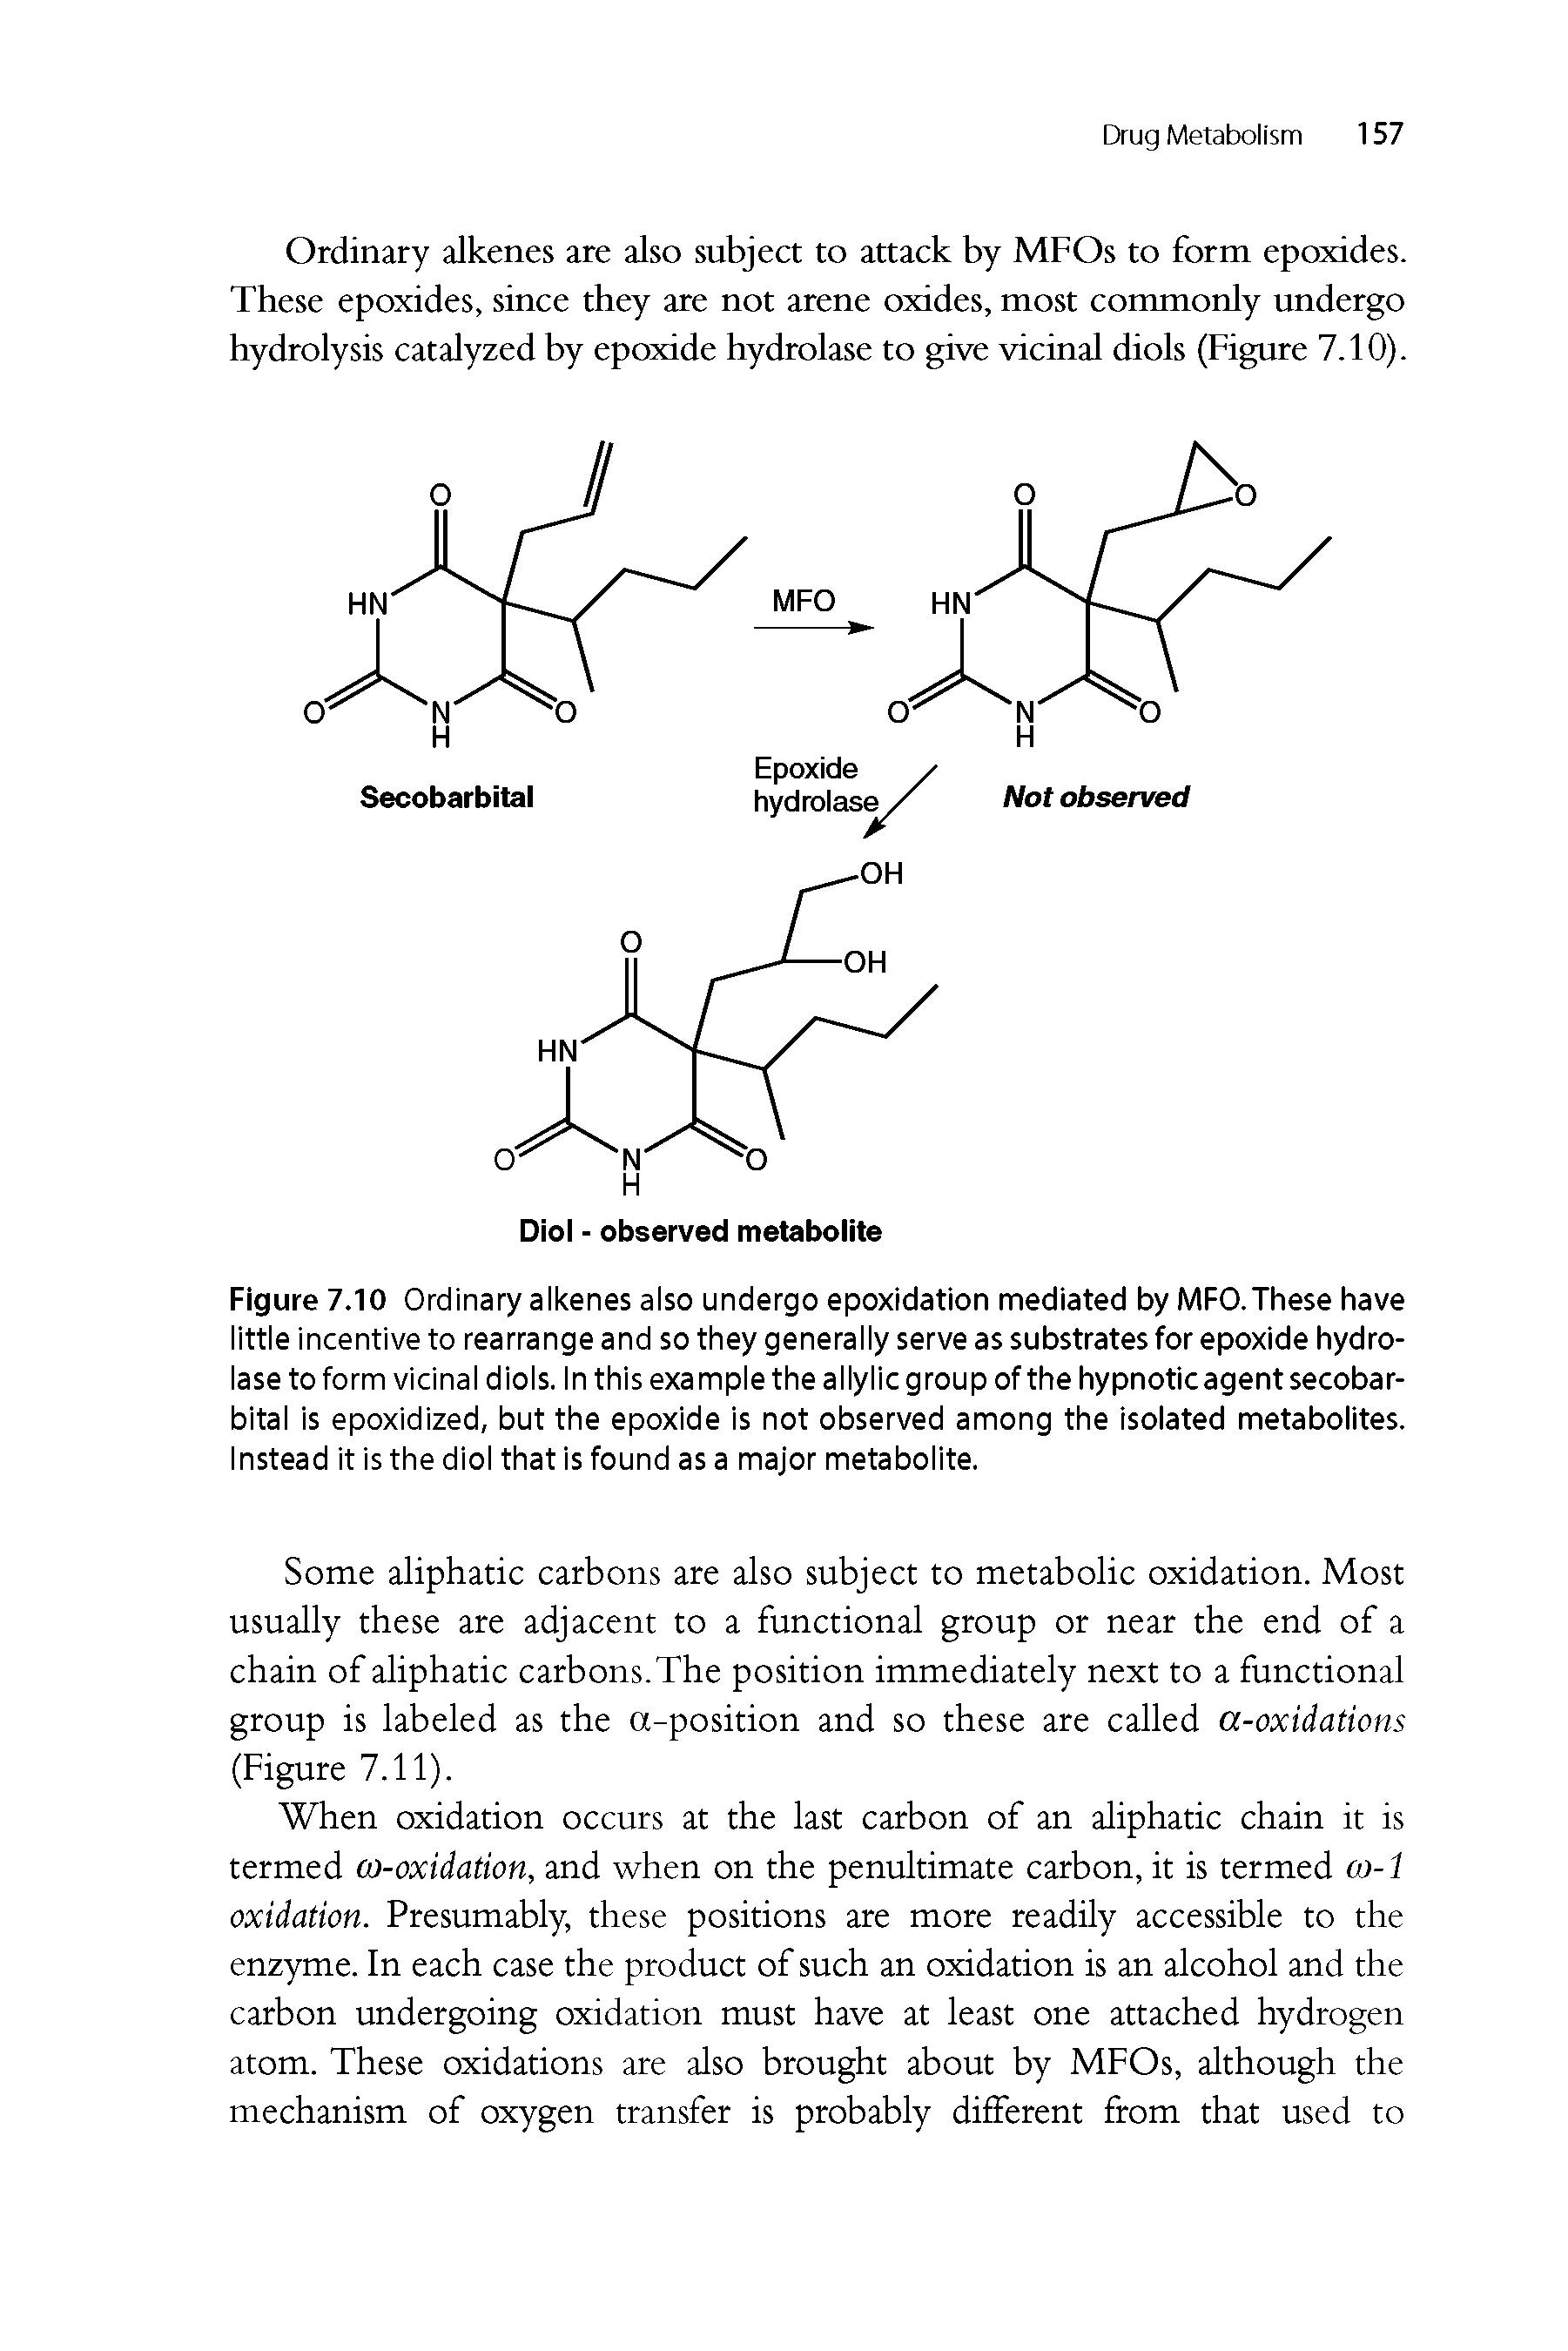 Figure 7.10 Ordinary alkenes also undergo epoxidation mediated by MFO.These have little incentive to rearrange and so they generally serve as substrates for epoxide hydrolase to form vicinal diols. In this example the allylic group of the hypnotic agent secobarbital is epoxidized, but the epoxide is not observed among the isolated metabolites. Instead it is the diol that is found as a major metabolite.